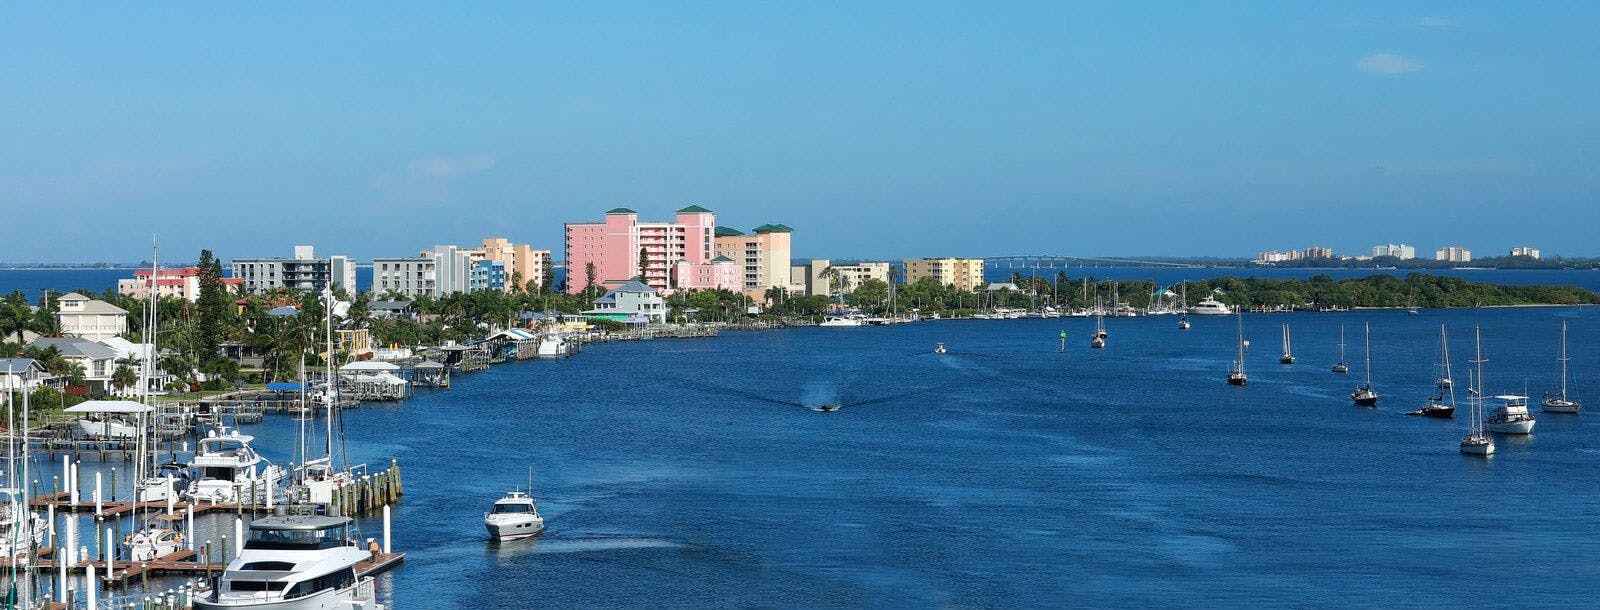 Fort Myers skyline by the sea